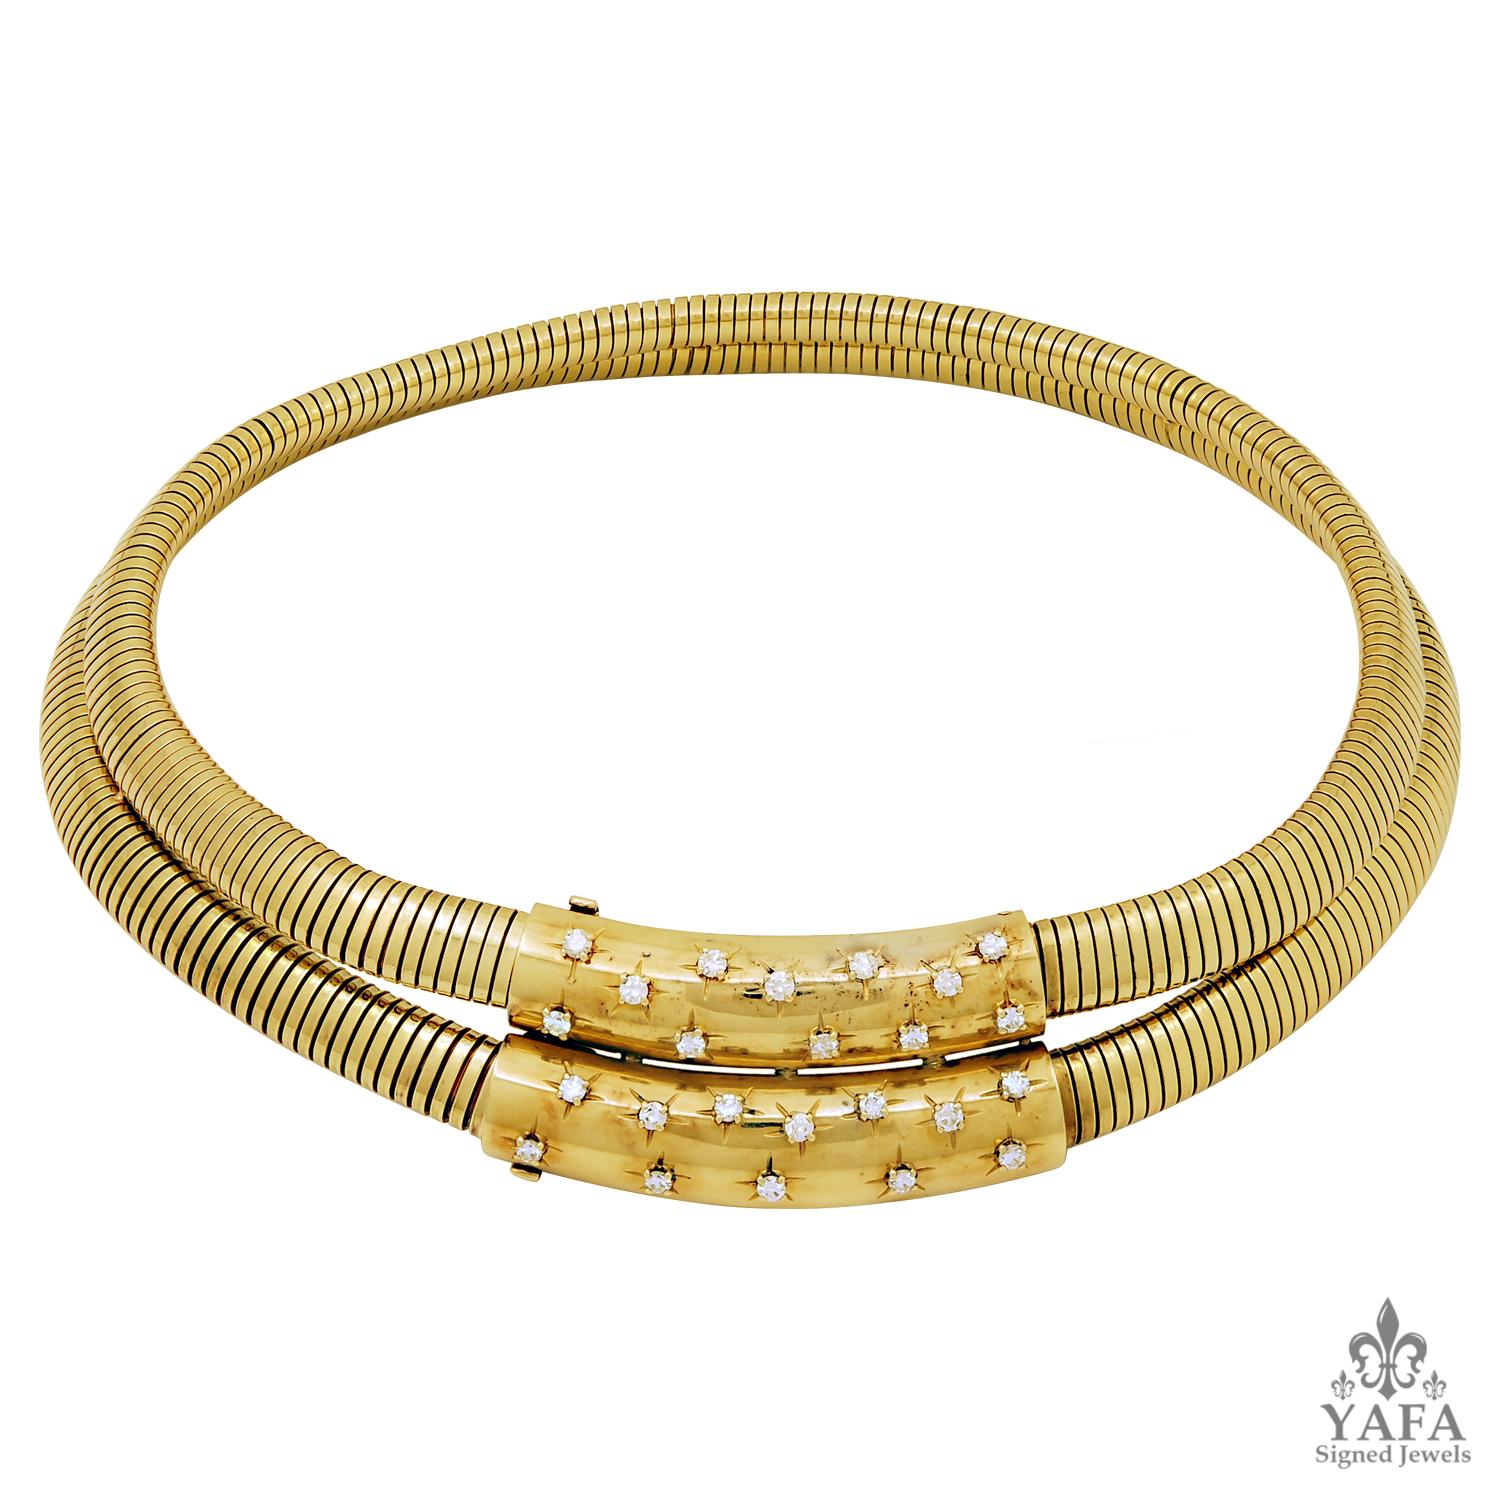 Van Cleef & Arpels Vintage Retro Double Diamond Gold Tubogaz Necklace
Significance
This exceptional Van Cleef & Arpels necklace is a wonder of retro design. This necklace is comprised of a revolutionary, flexible Tubogas link chain of 18K yellow